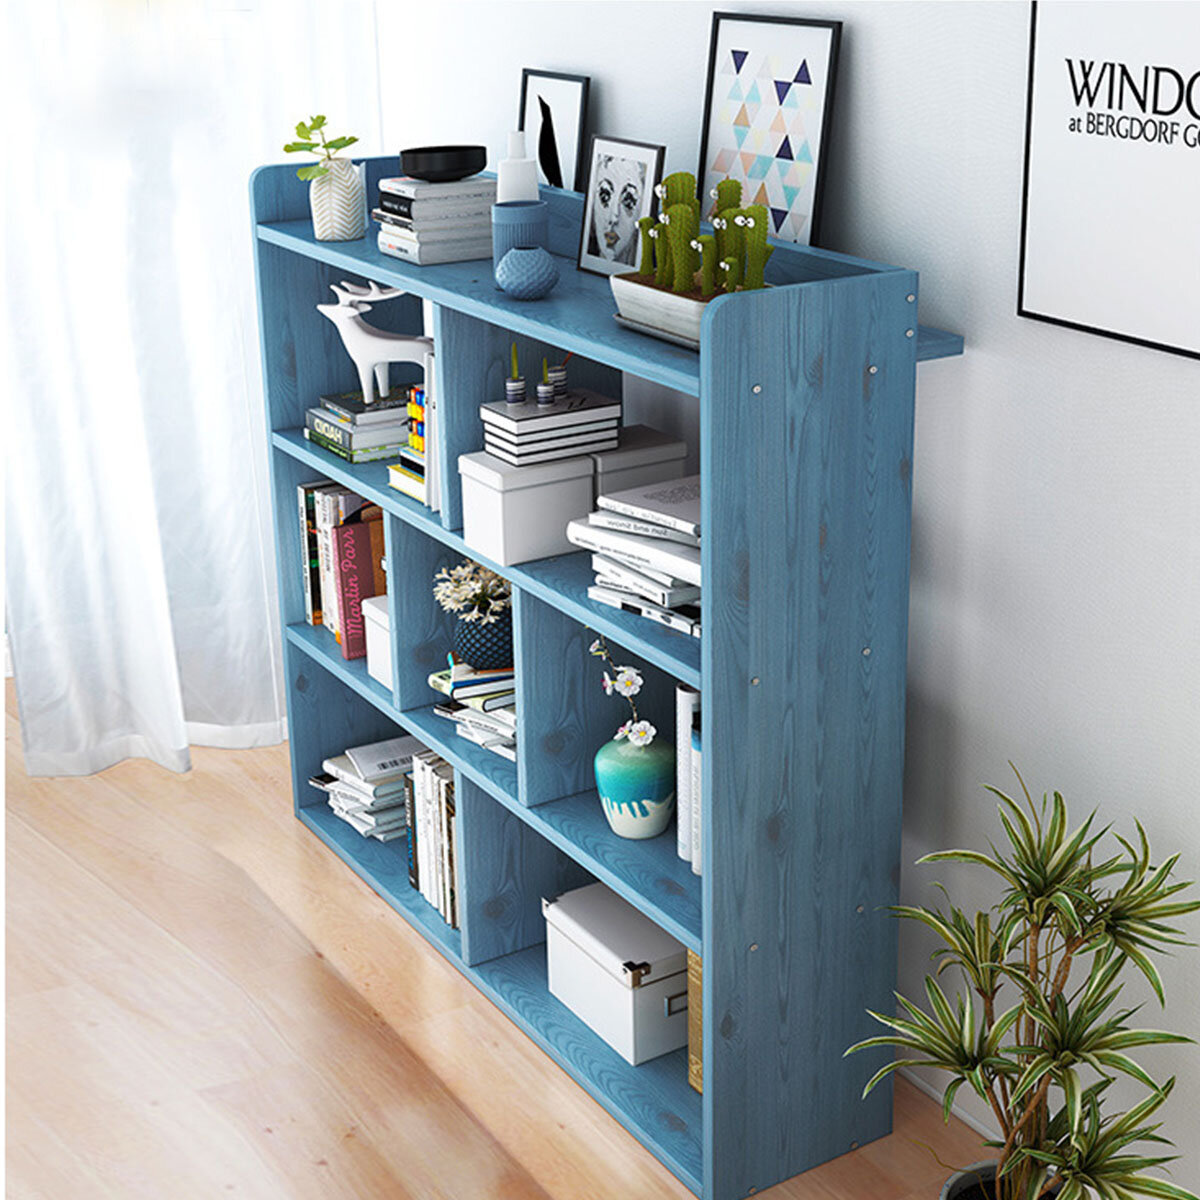 Image of Simple Combination Bookshelf Floor Living Room Storage Shelf Space-Saving Bedroom Small Bookcase For Office Home